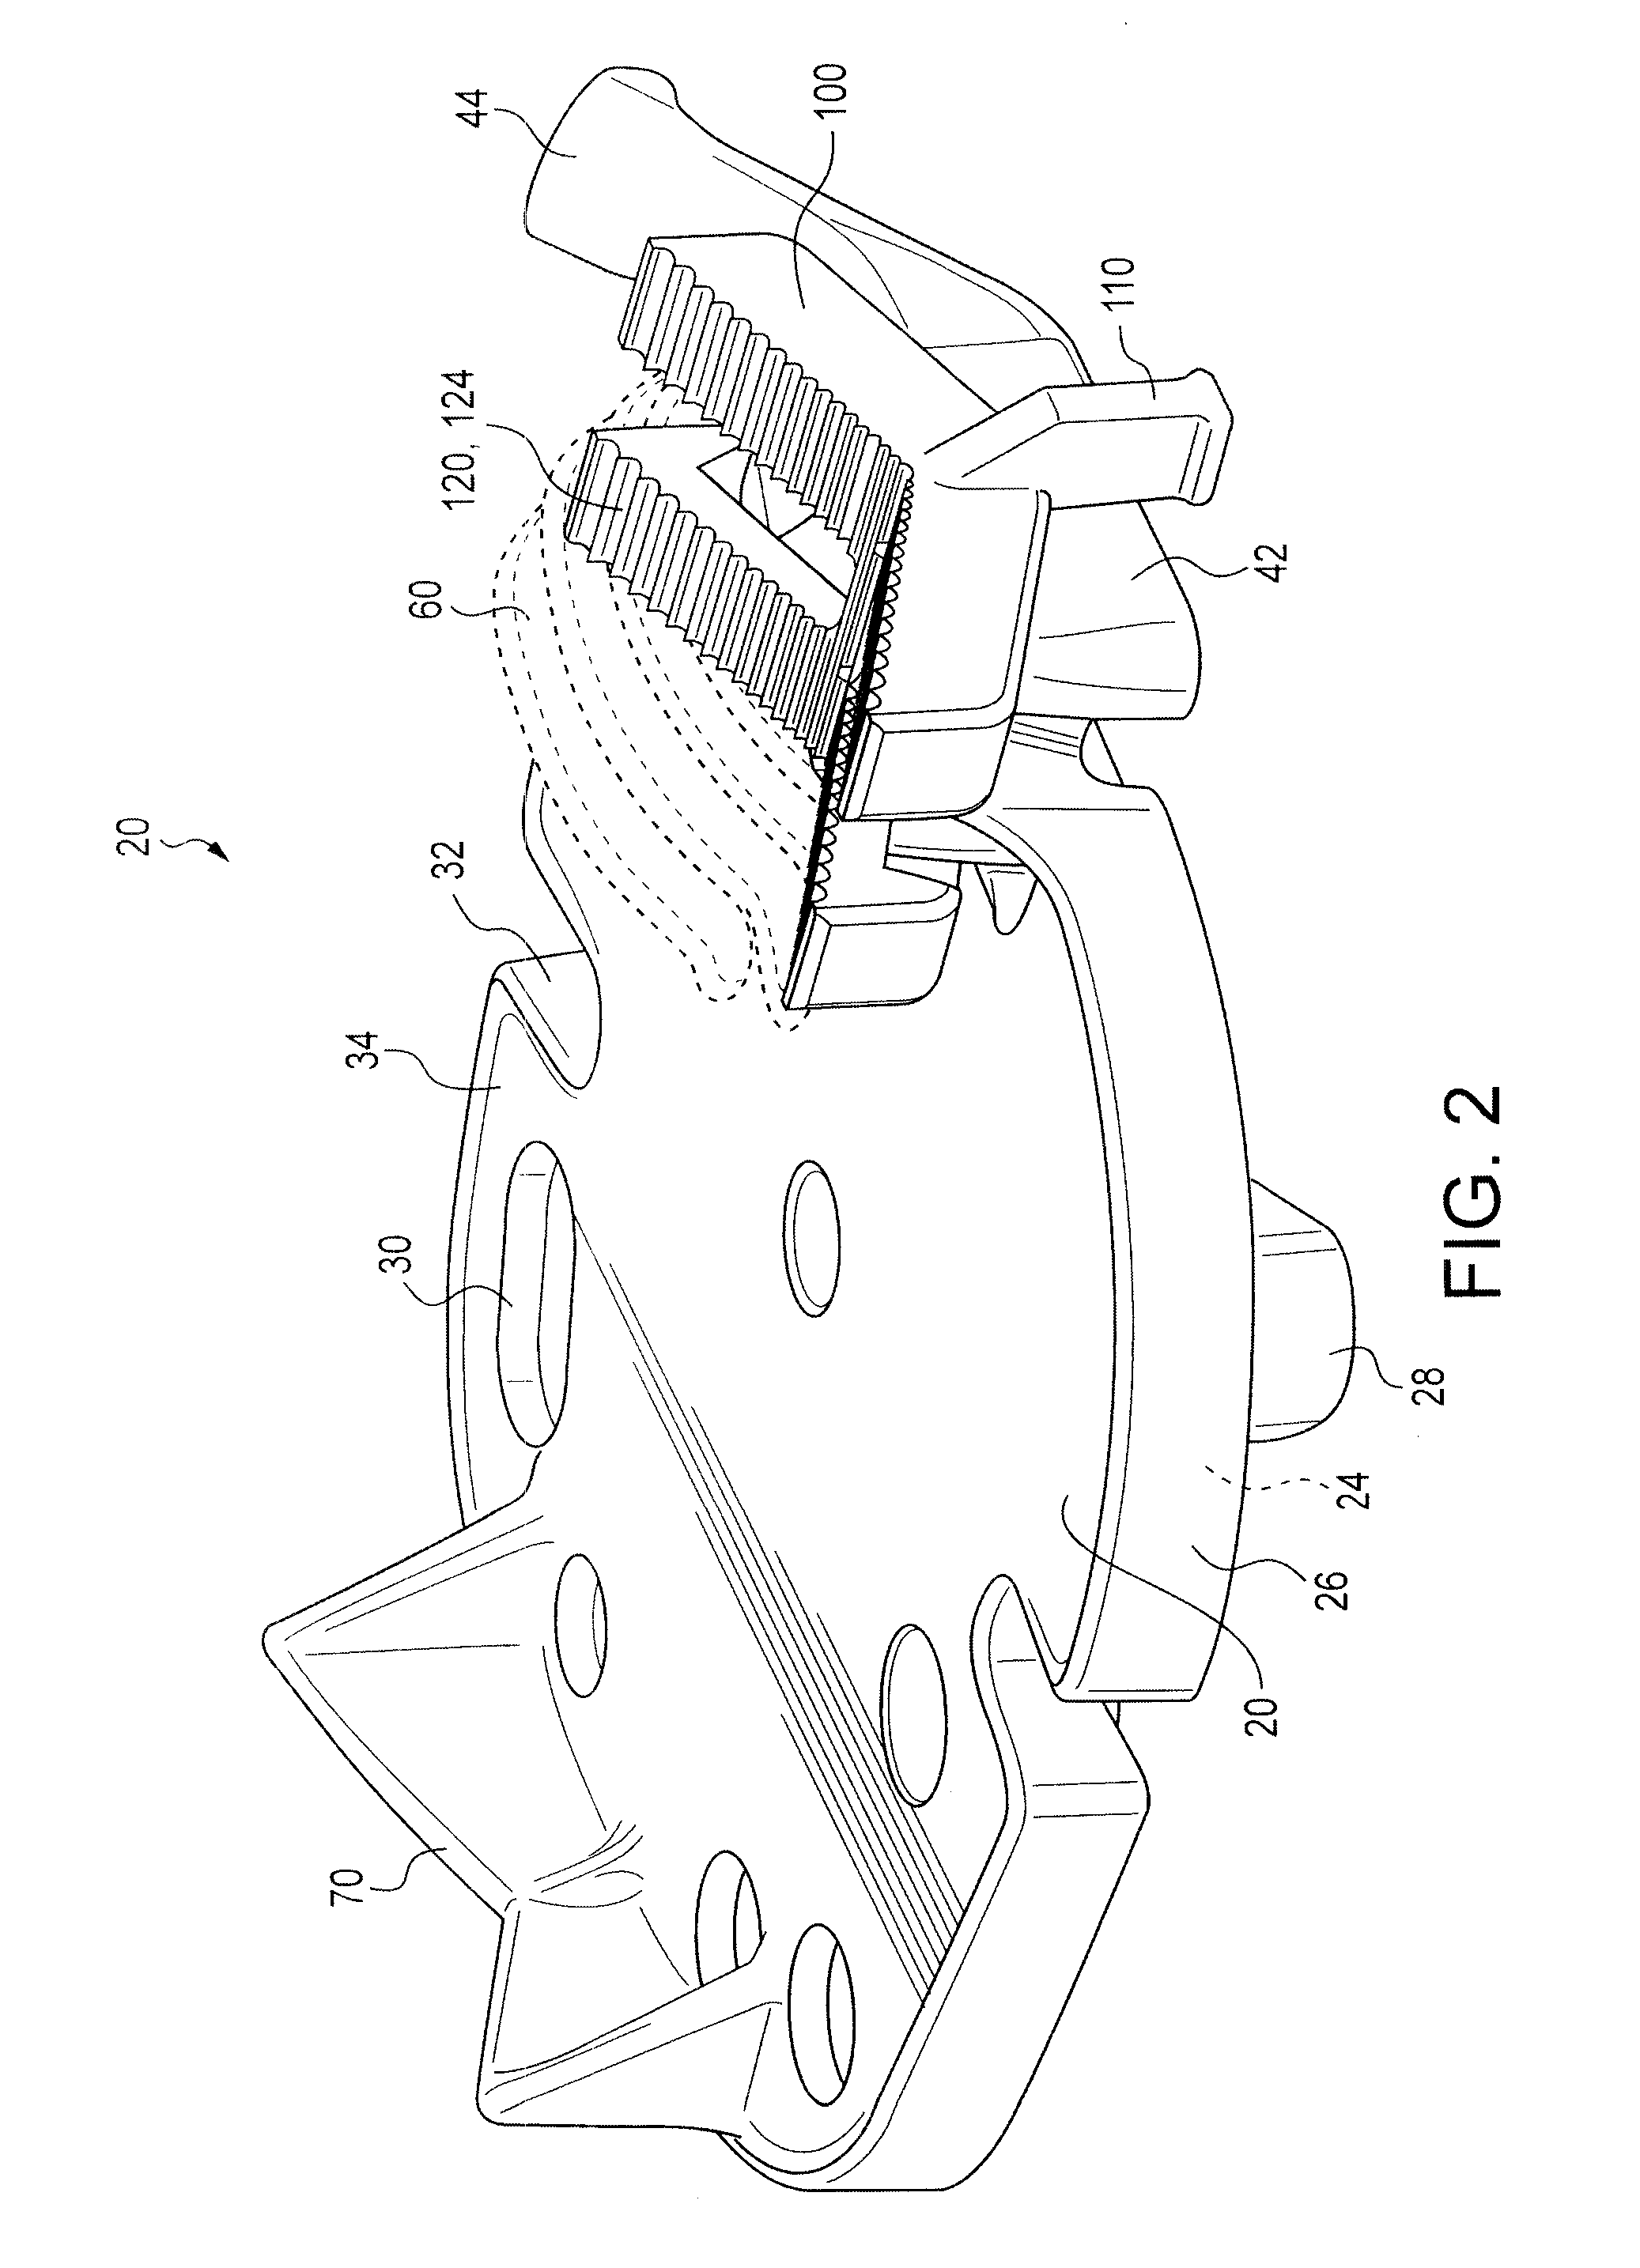 Grounding component for electric welding systems and methods